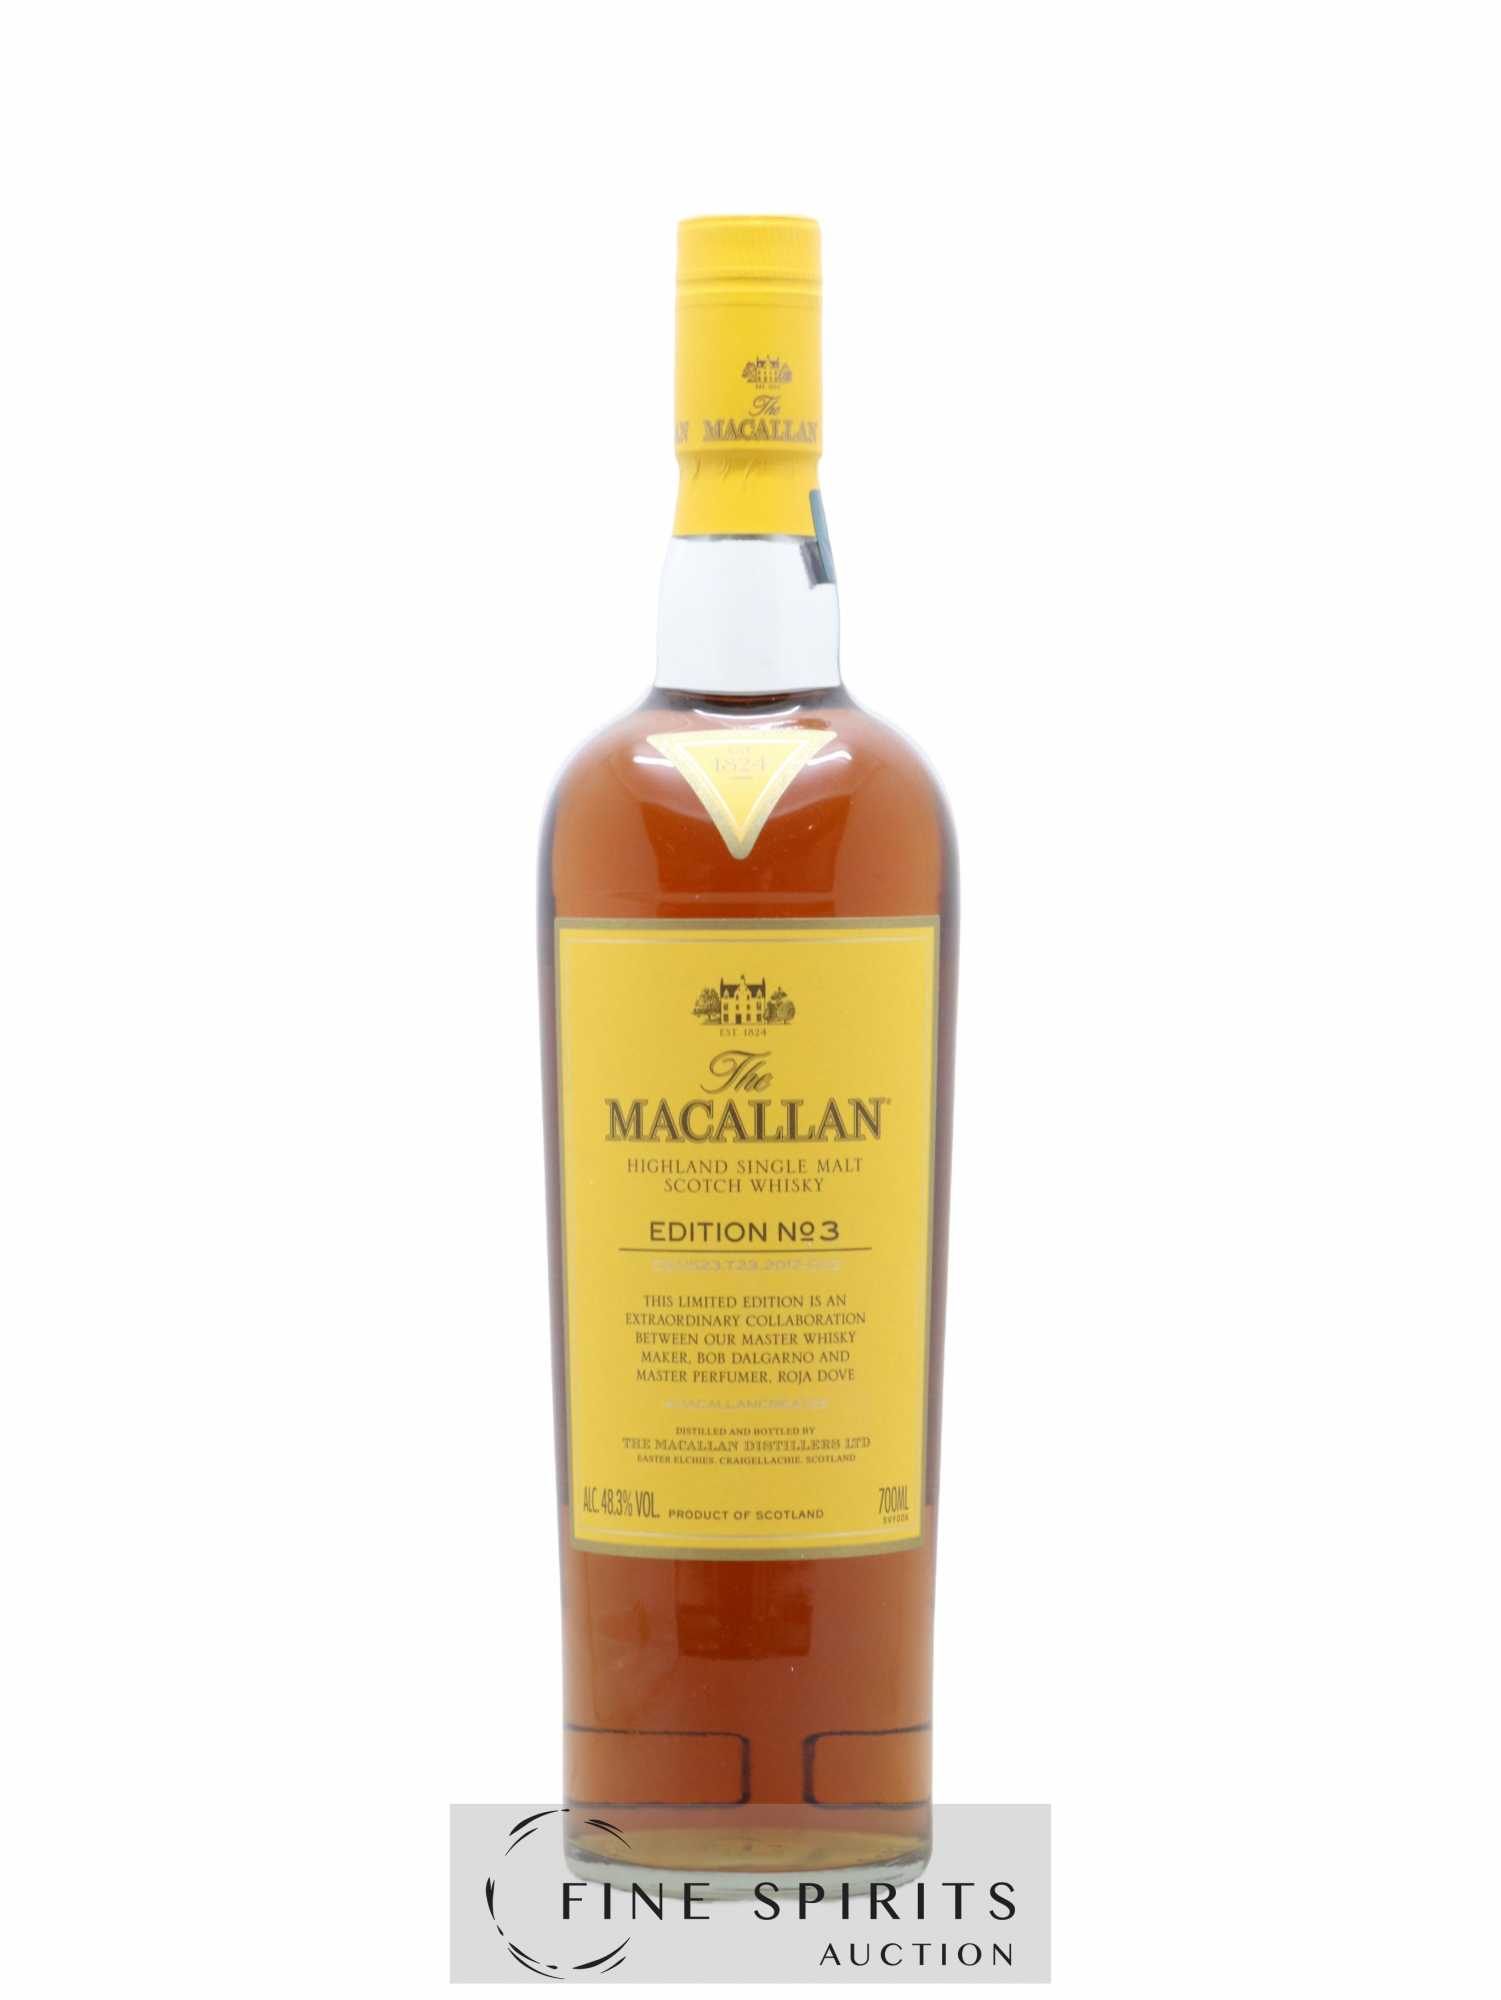 Macallan (The) Of. Edition n°3 C6.V523.T23.2017-003 Limited Edition